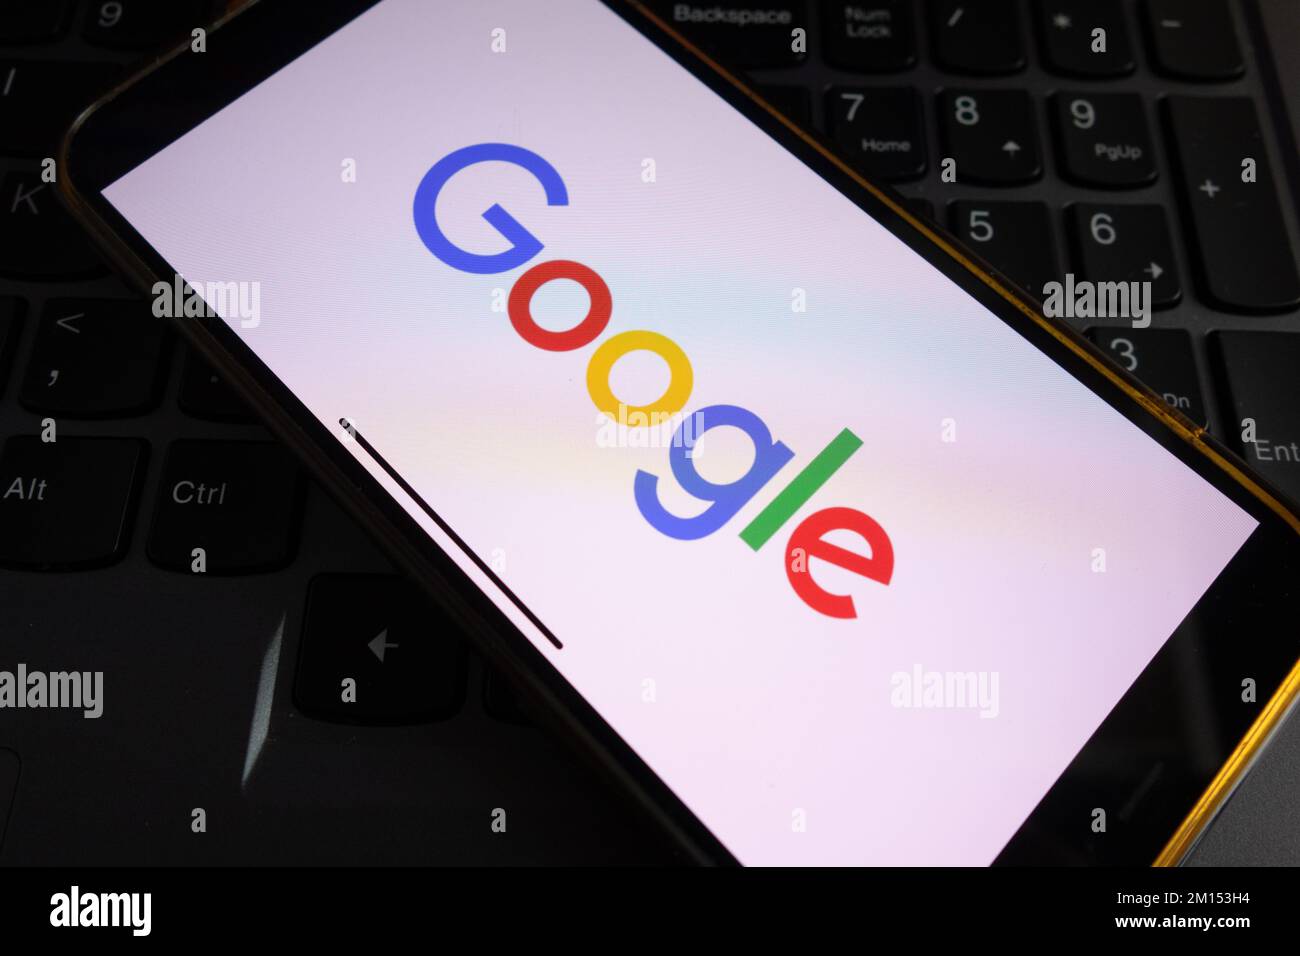 KONSKIE, POLAND - September 17, 2022: Google Search logo displayed on smartphone screen in the office. Google Search is the most popular web search en Stock Photo